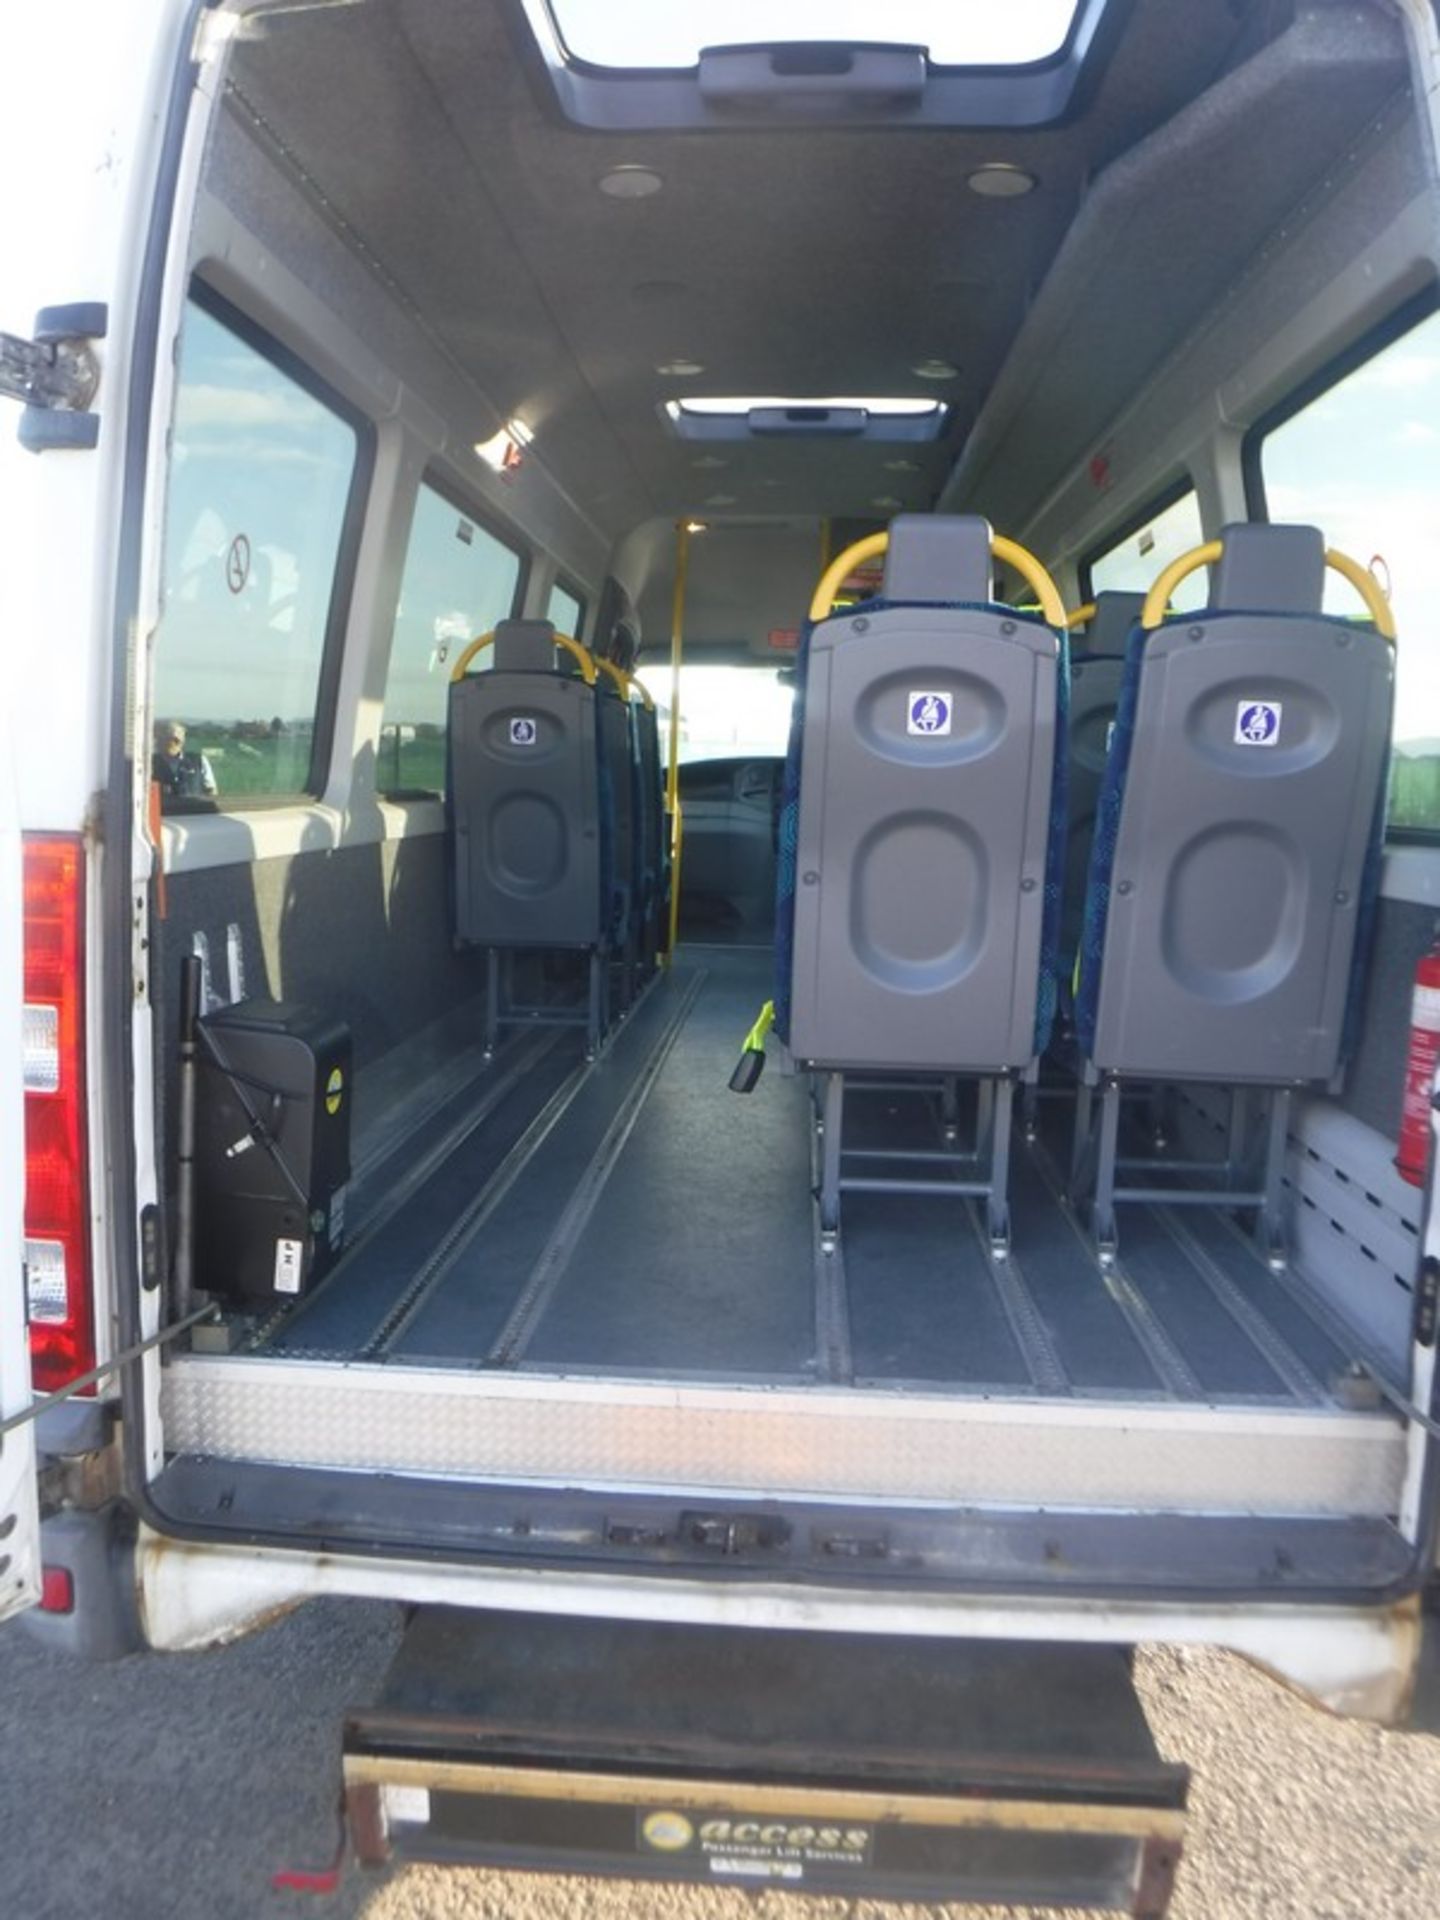 IVECO DAILY - 2998cc - Image 2 of 18